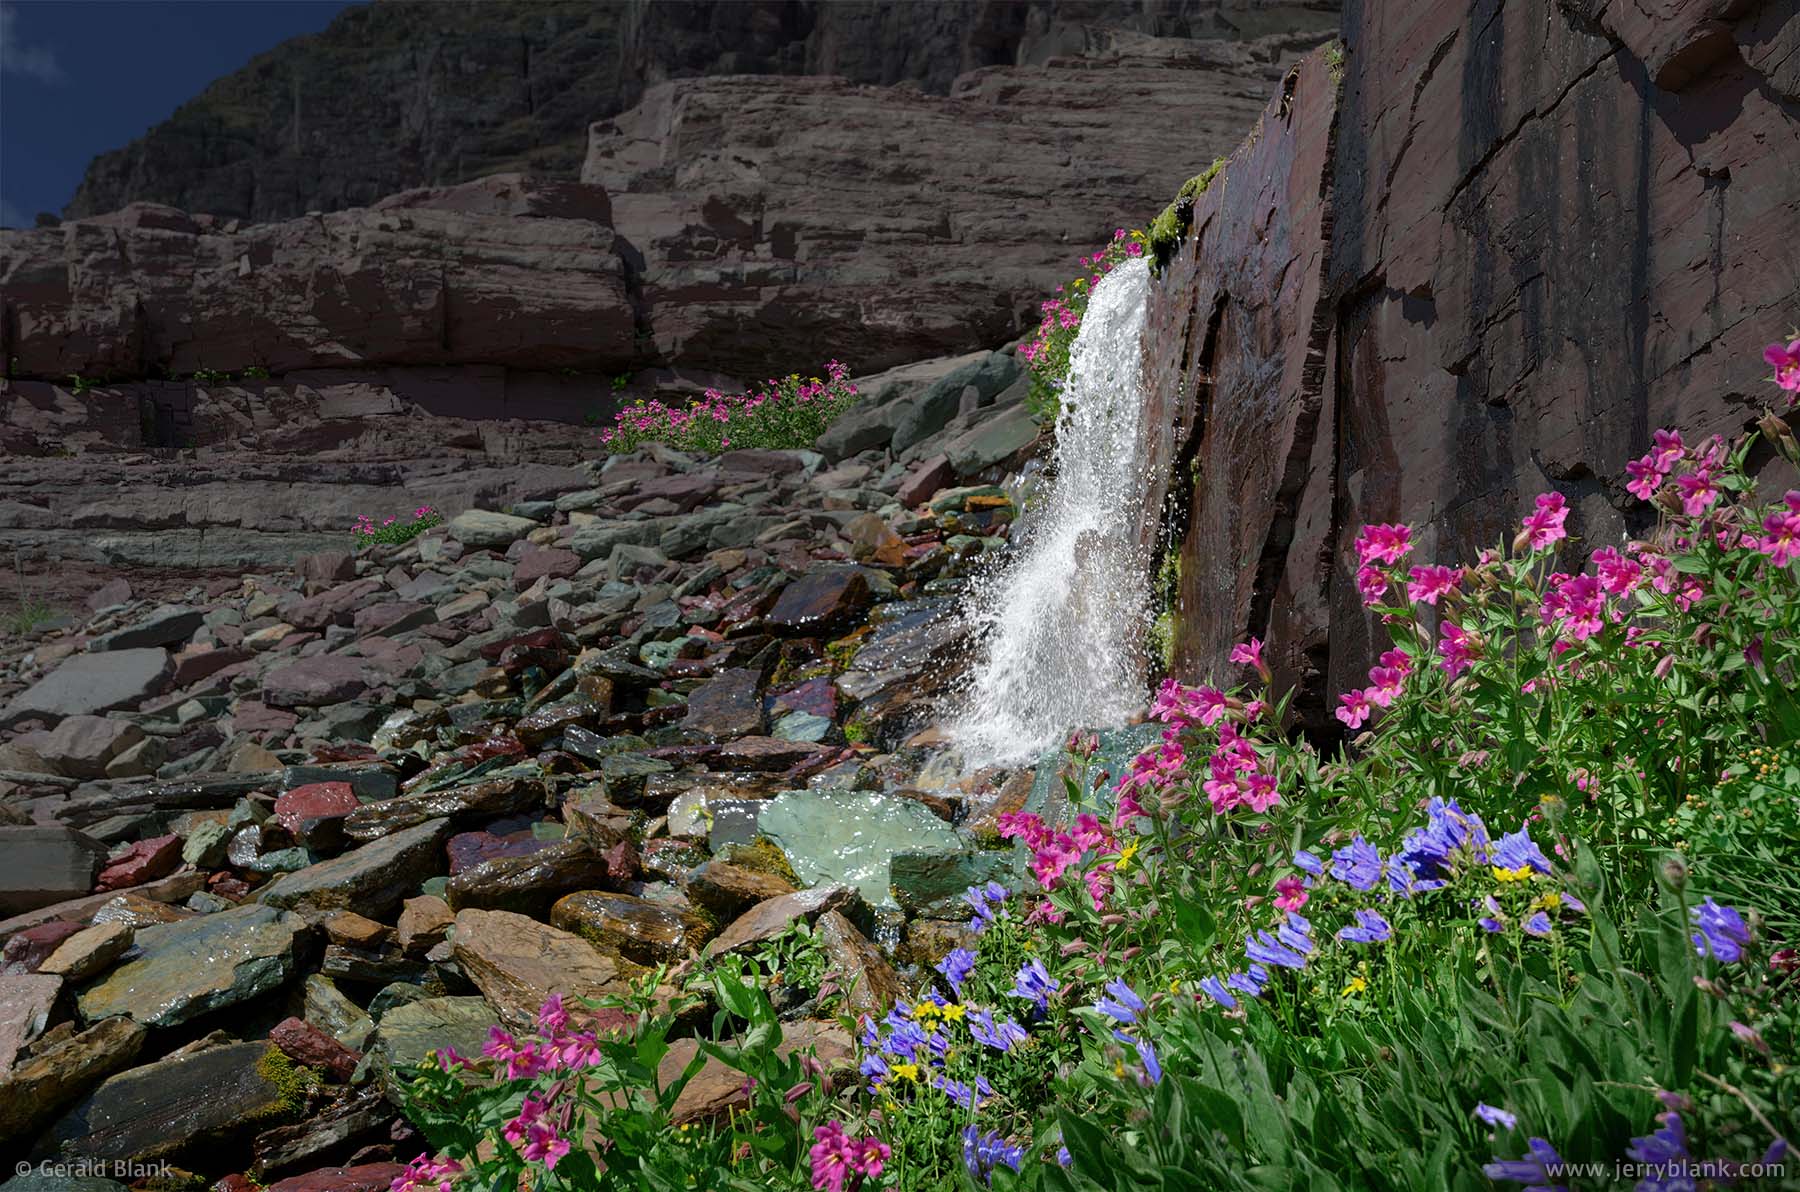 #26218 - Snowmelt from Clements Mountain cascades past wildflowers through colorful rocks, in Glacier National Park, Montana - photo by Jerry Blank